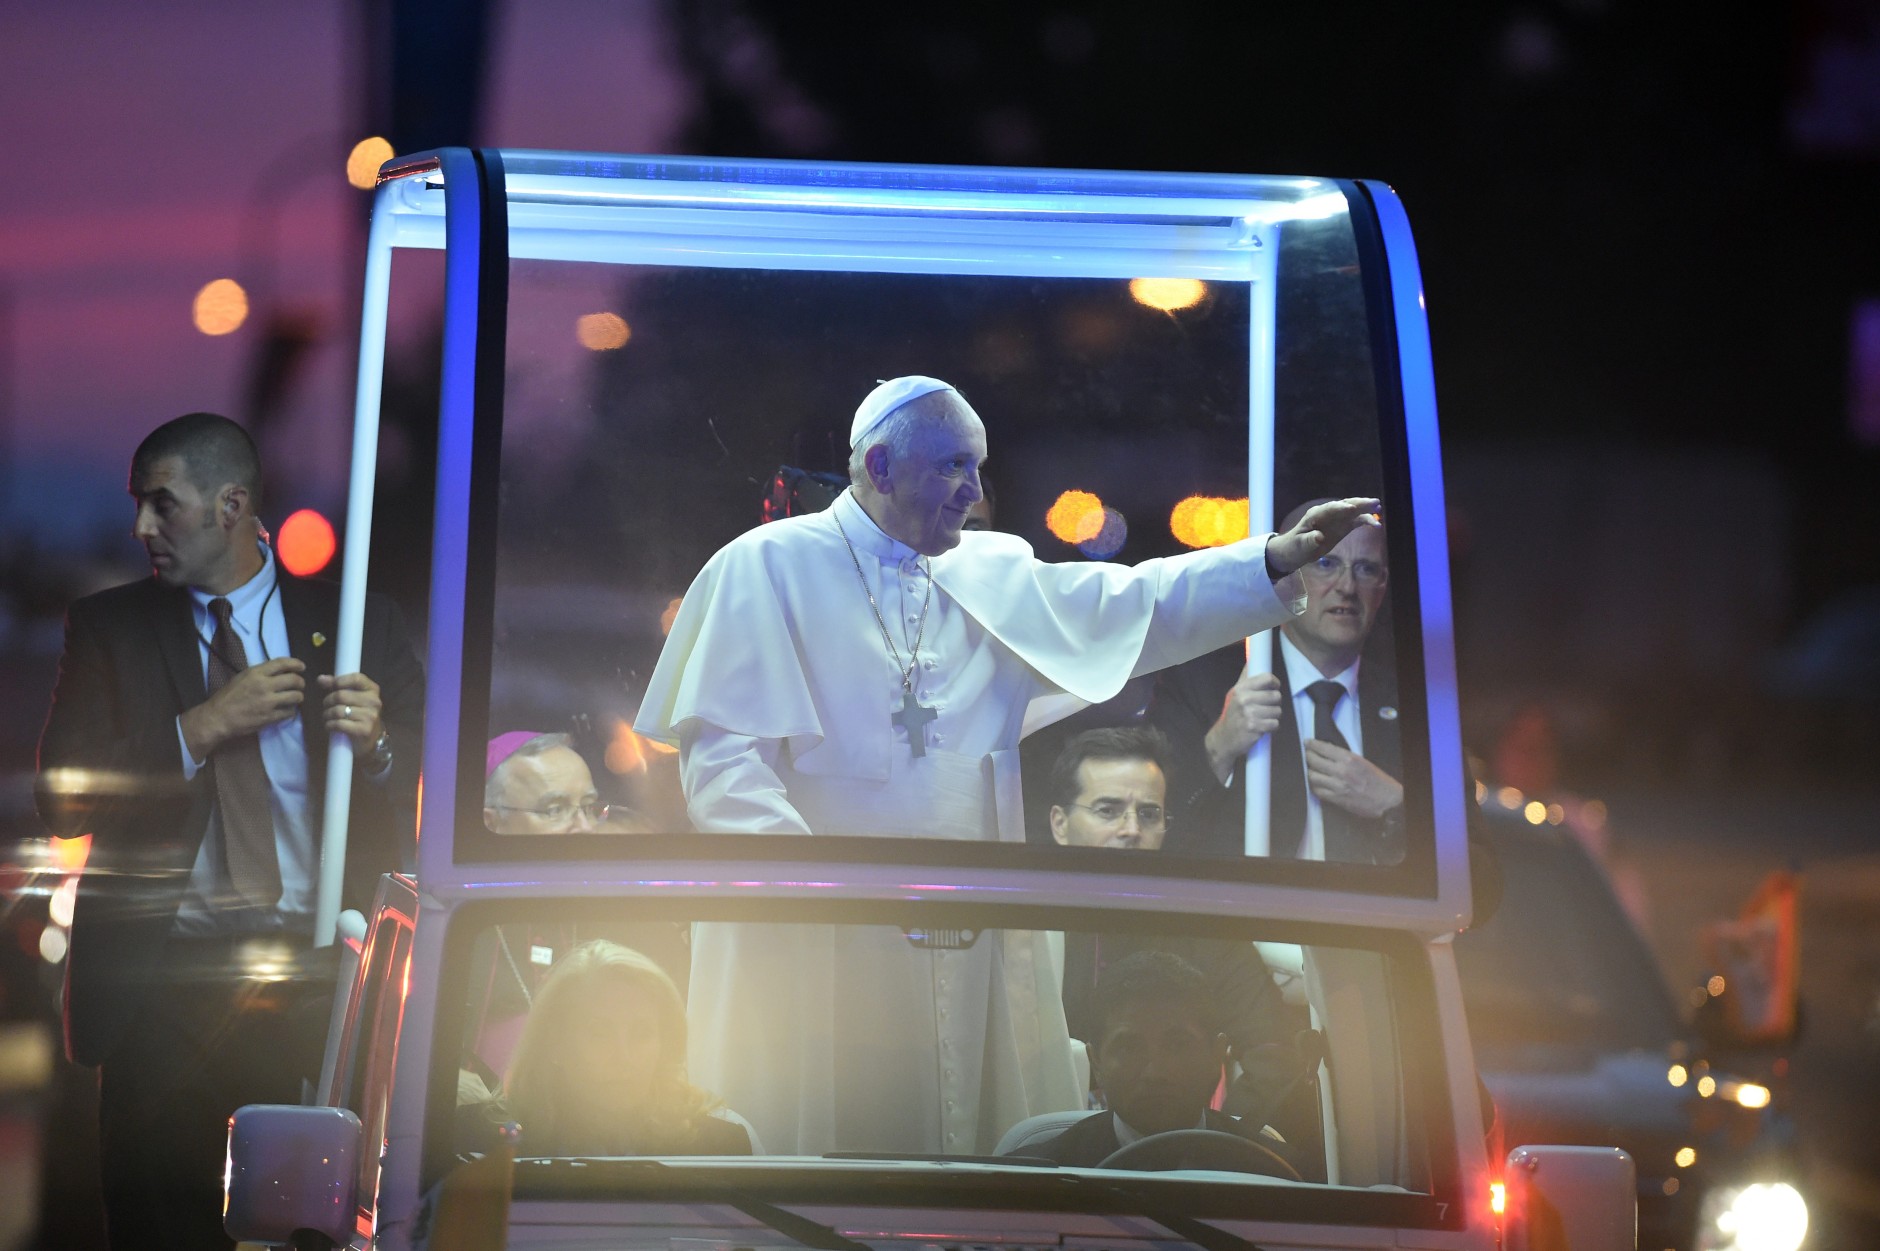 PHILADELPHIA, PA - SEPTEMBER 26: Pope Francis greets the crowd en route to the Festival of Families on September 26, 2015 in Philadelphia, Pennsylvania. Pope Francis wraps up his trip to the United States with two days in Philadelphia, attending the Festival of Families and meeting with prisoners at the Curran-Fromhold Correctional Facility. (Photo by Jewel Samad-Pool/Getty Images)